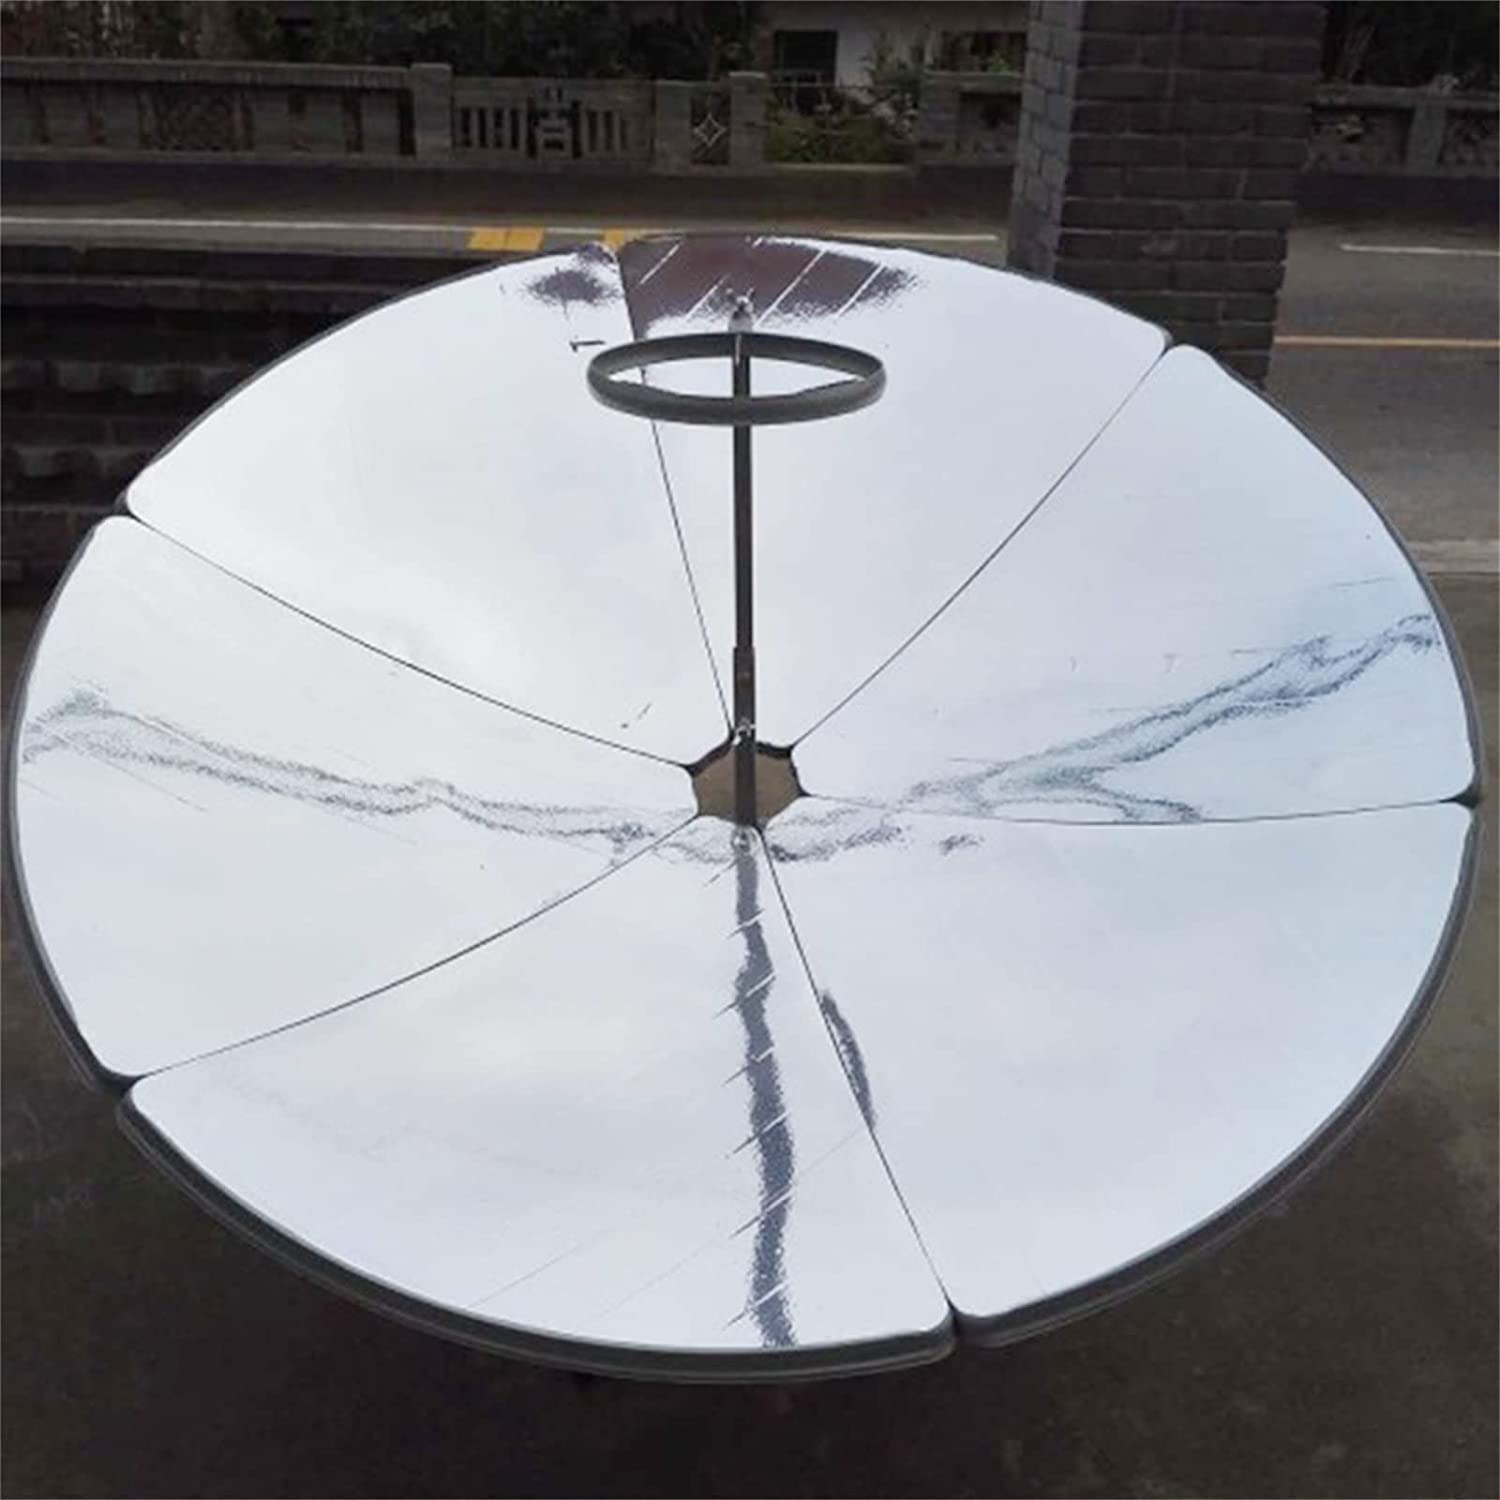 Concentrating Solar Cooker, 59'' Diameter Camping Outdoor Solar Cooker for Outdoor Cooking Steaming, Solar Heating, Visual Education DIY Solar Concentrator, Instantaneous Temperature 1472-1832℉